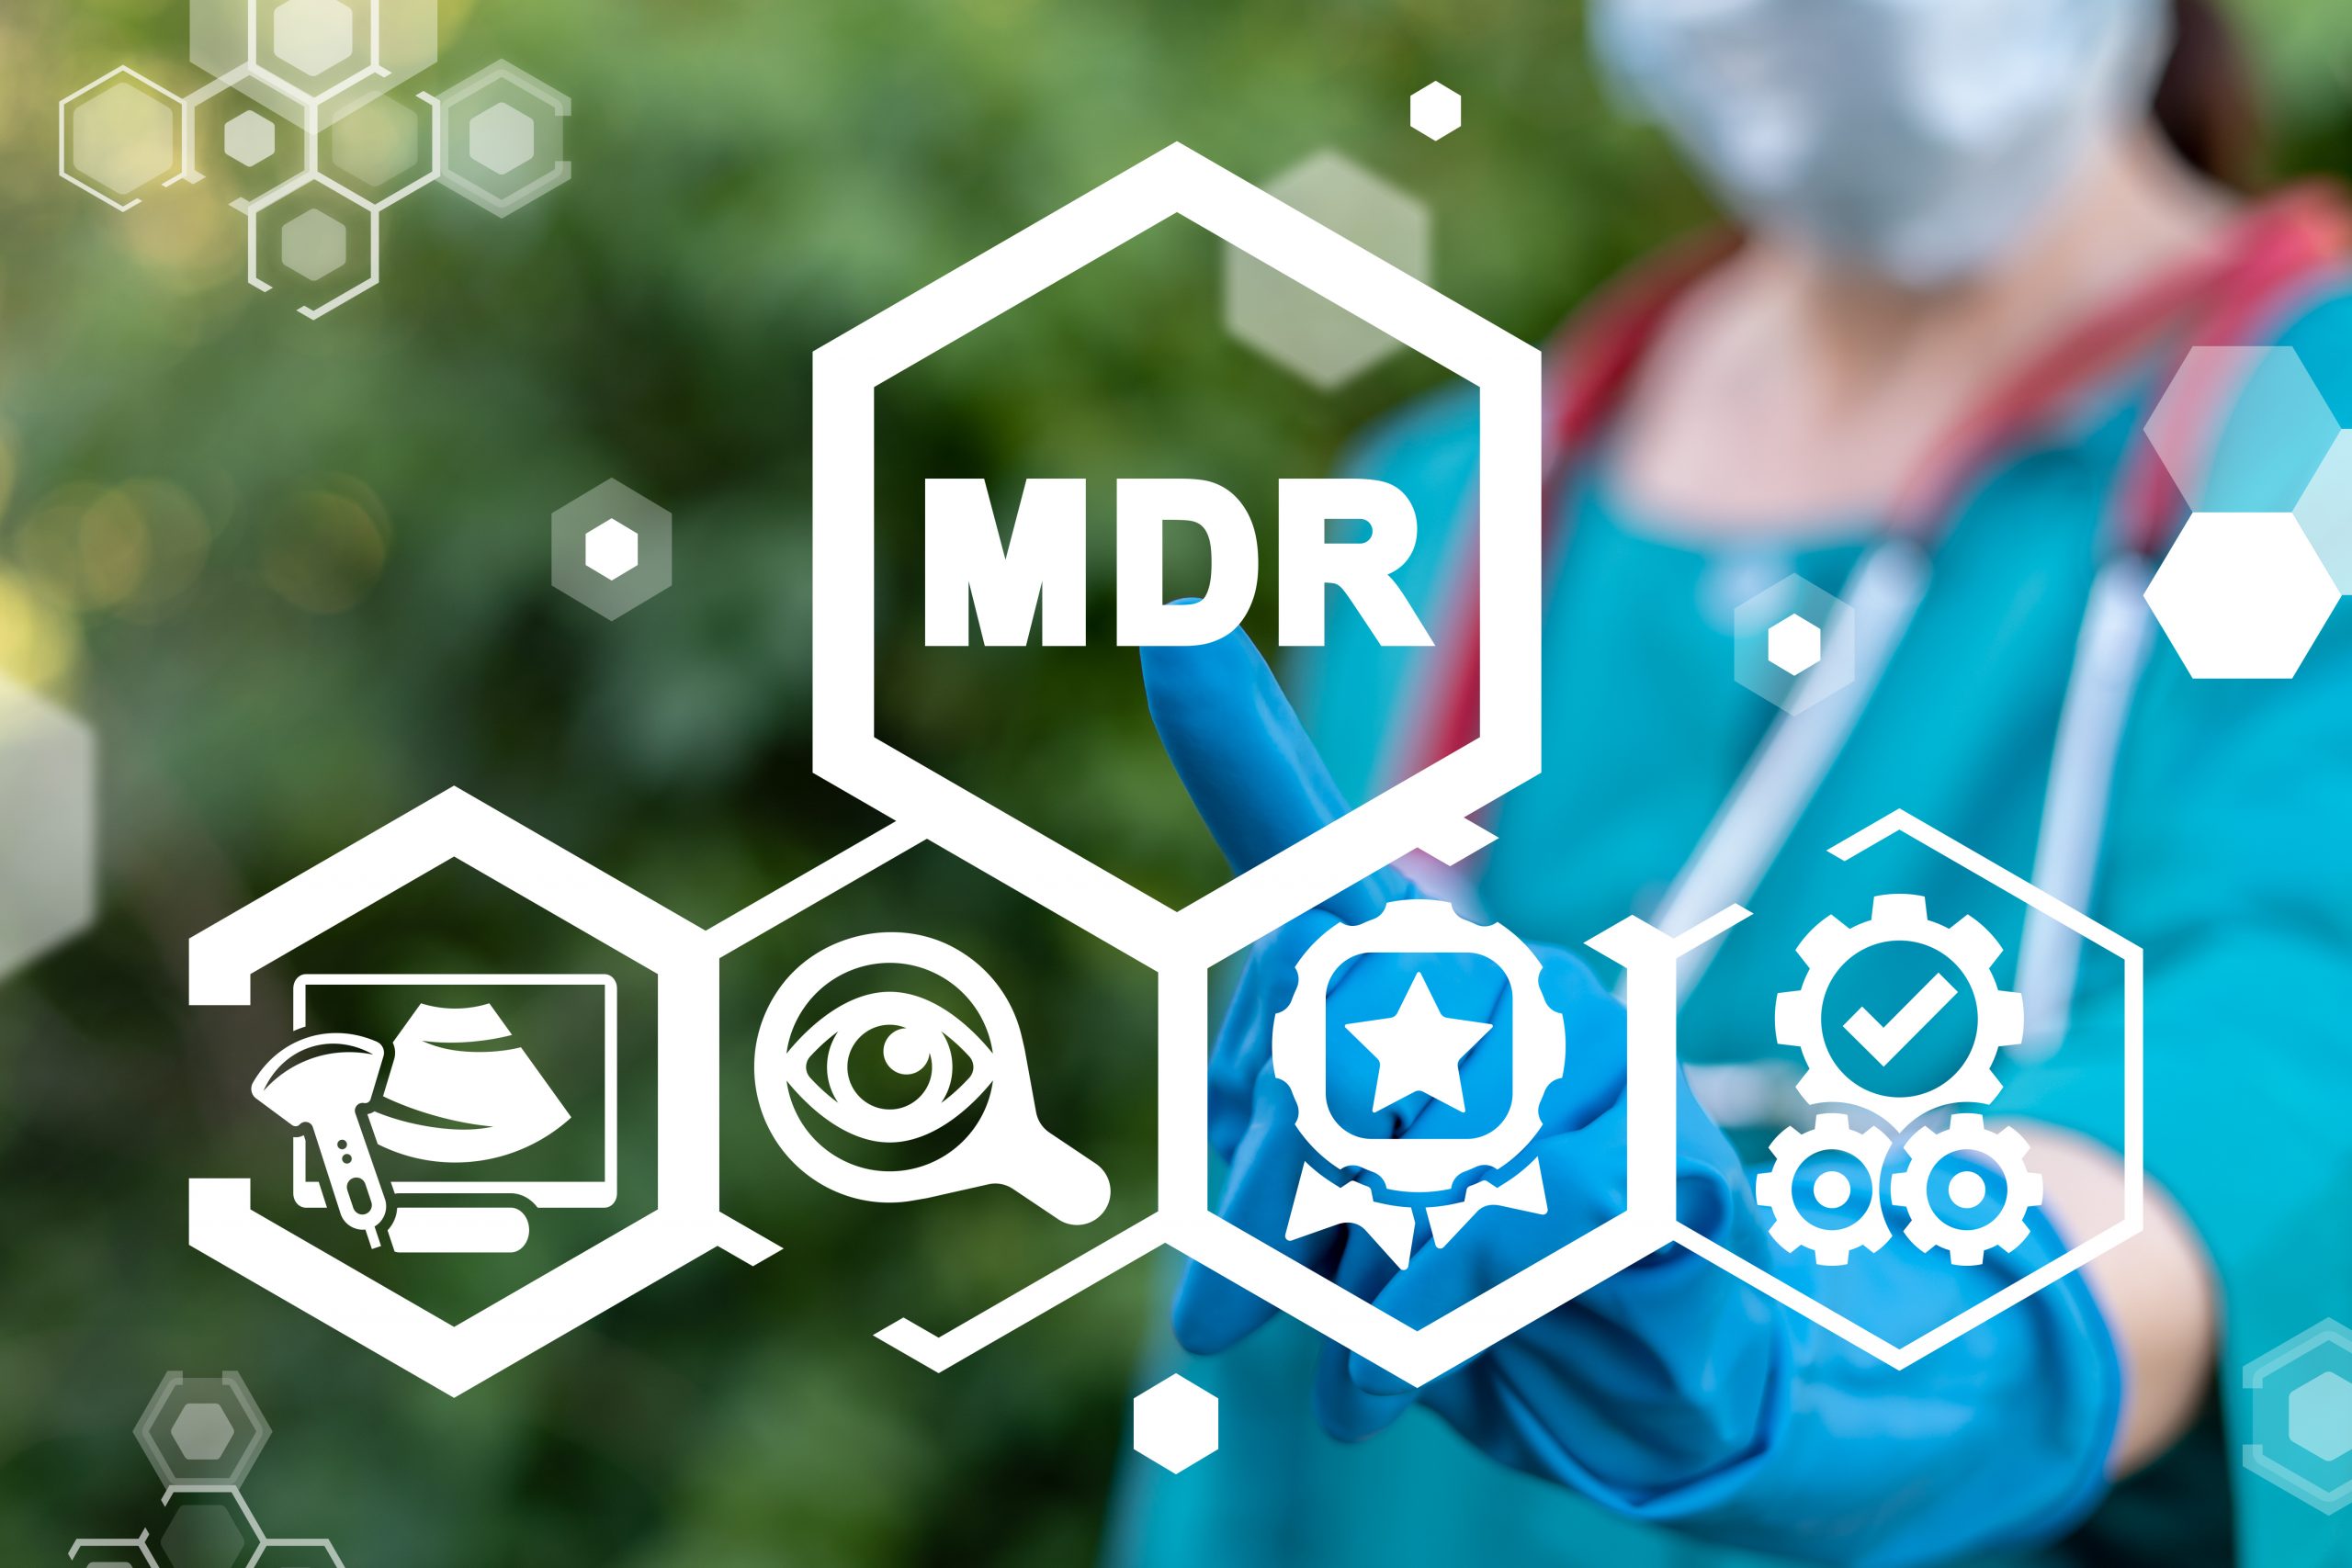 Are you ready for the MDR? This is how new EU regulations may impact